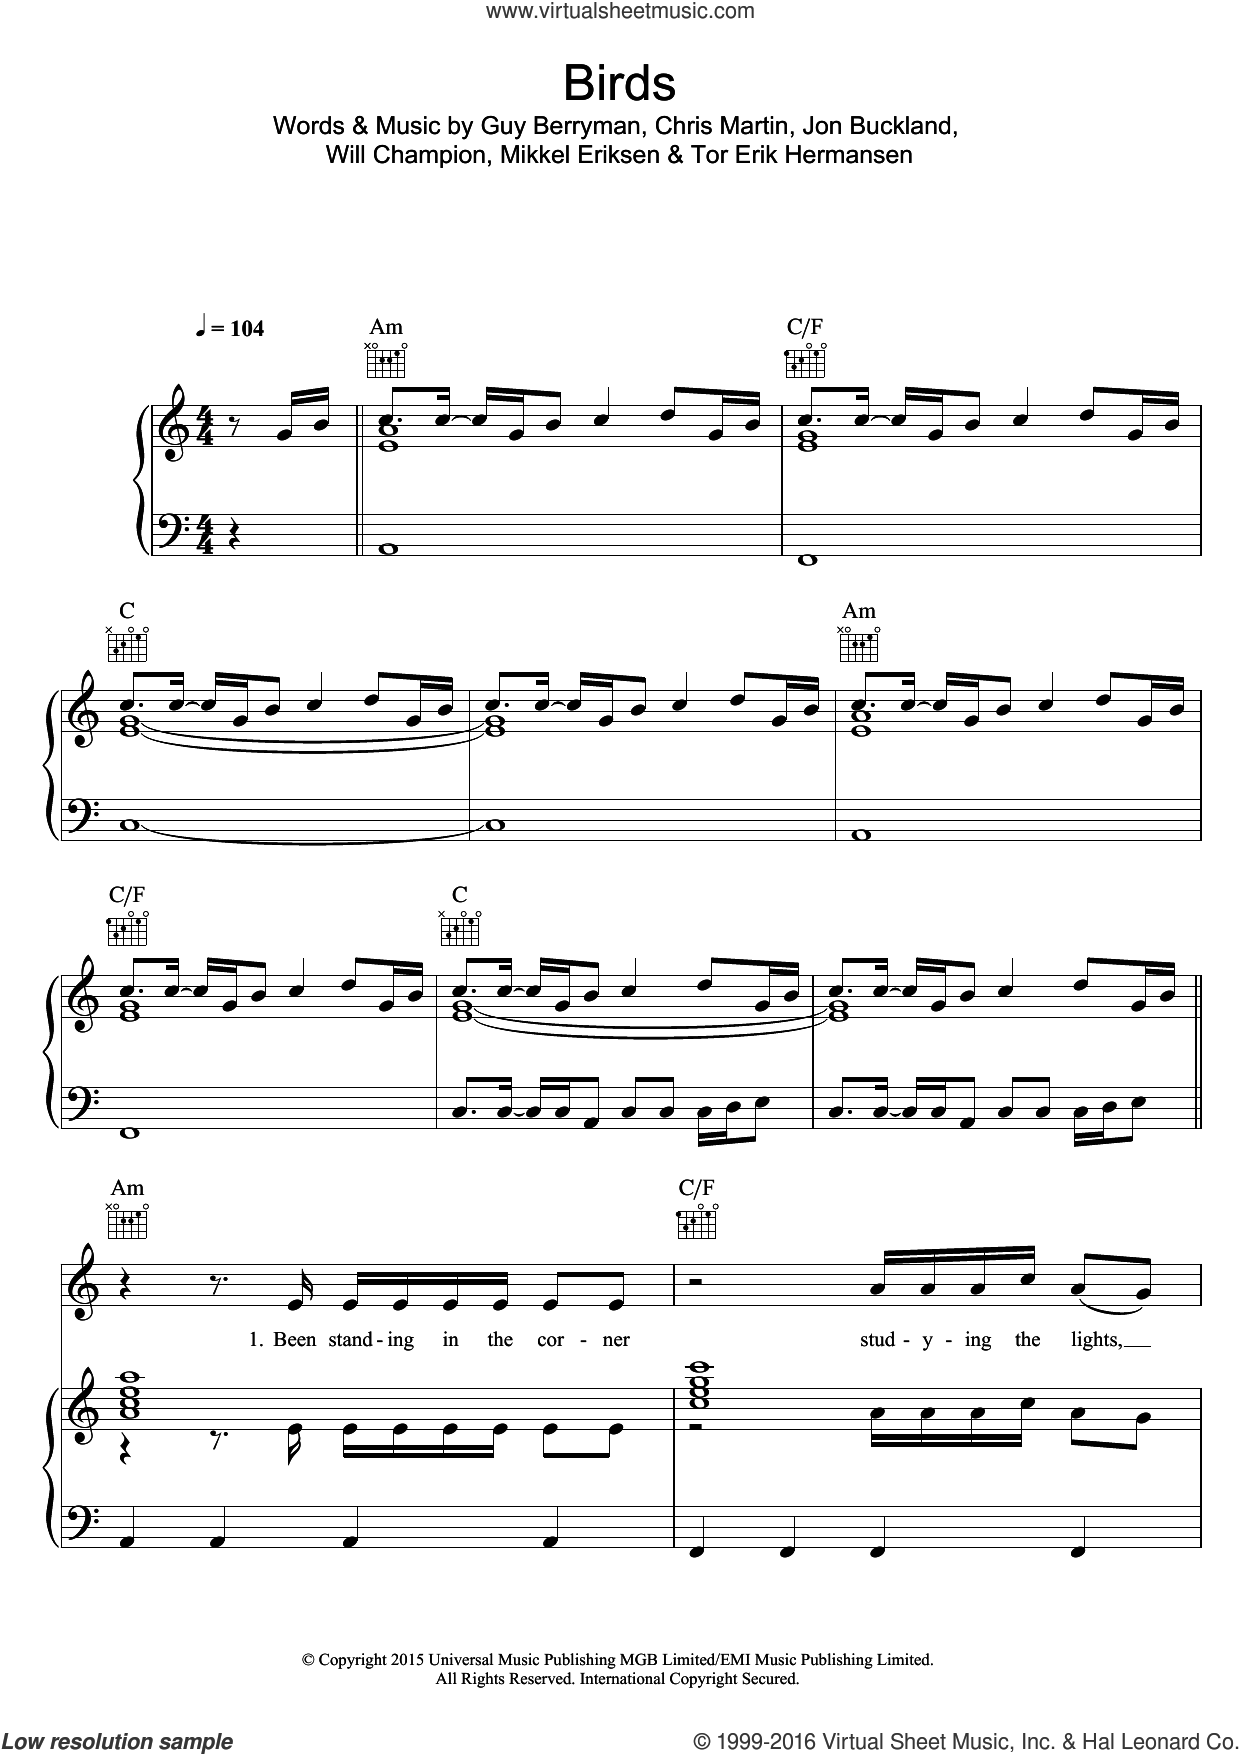 Coldplay - Birds sheet music for voice, piano or guitar [PDF]